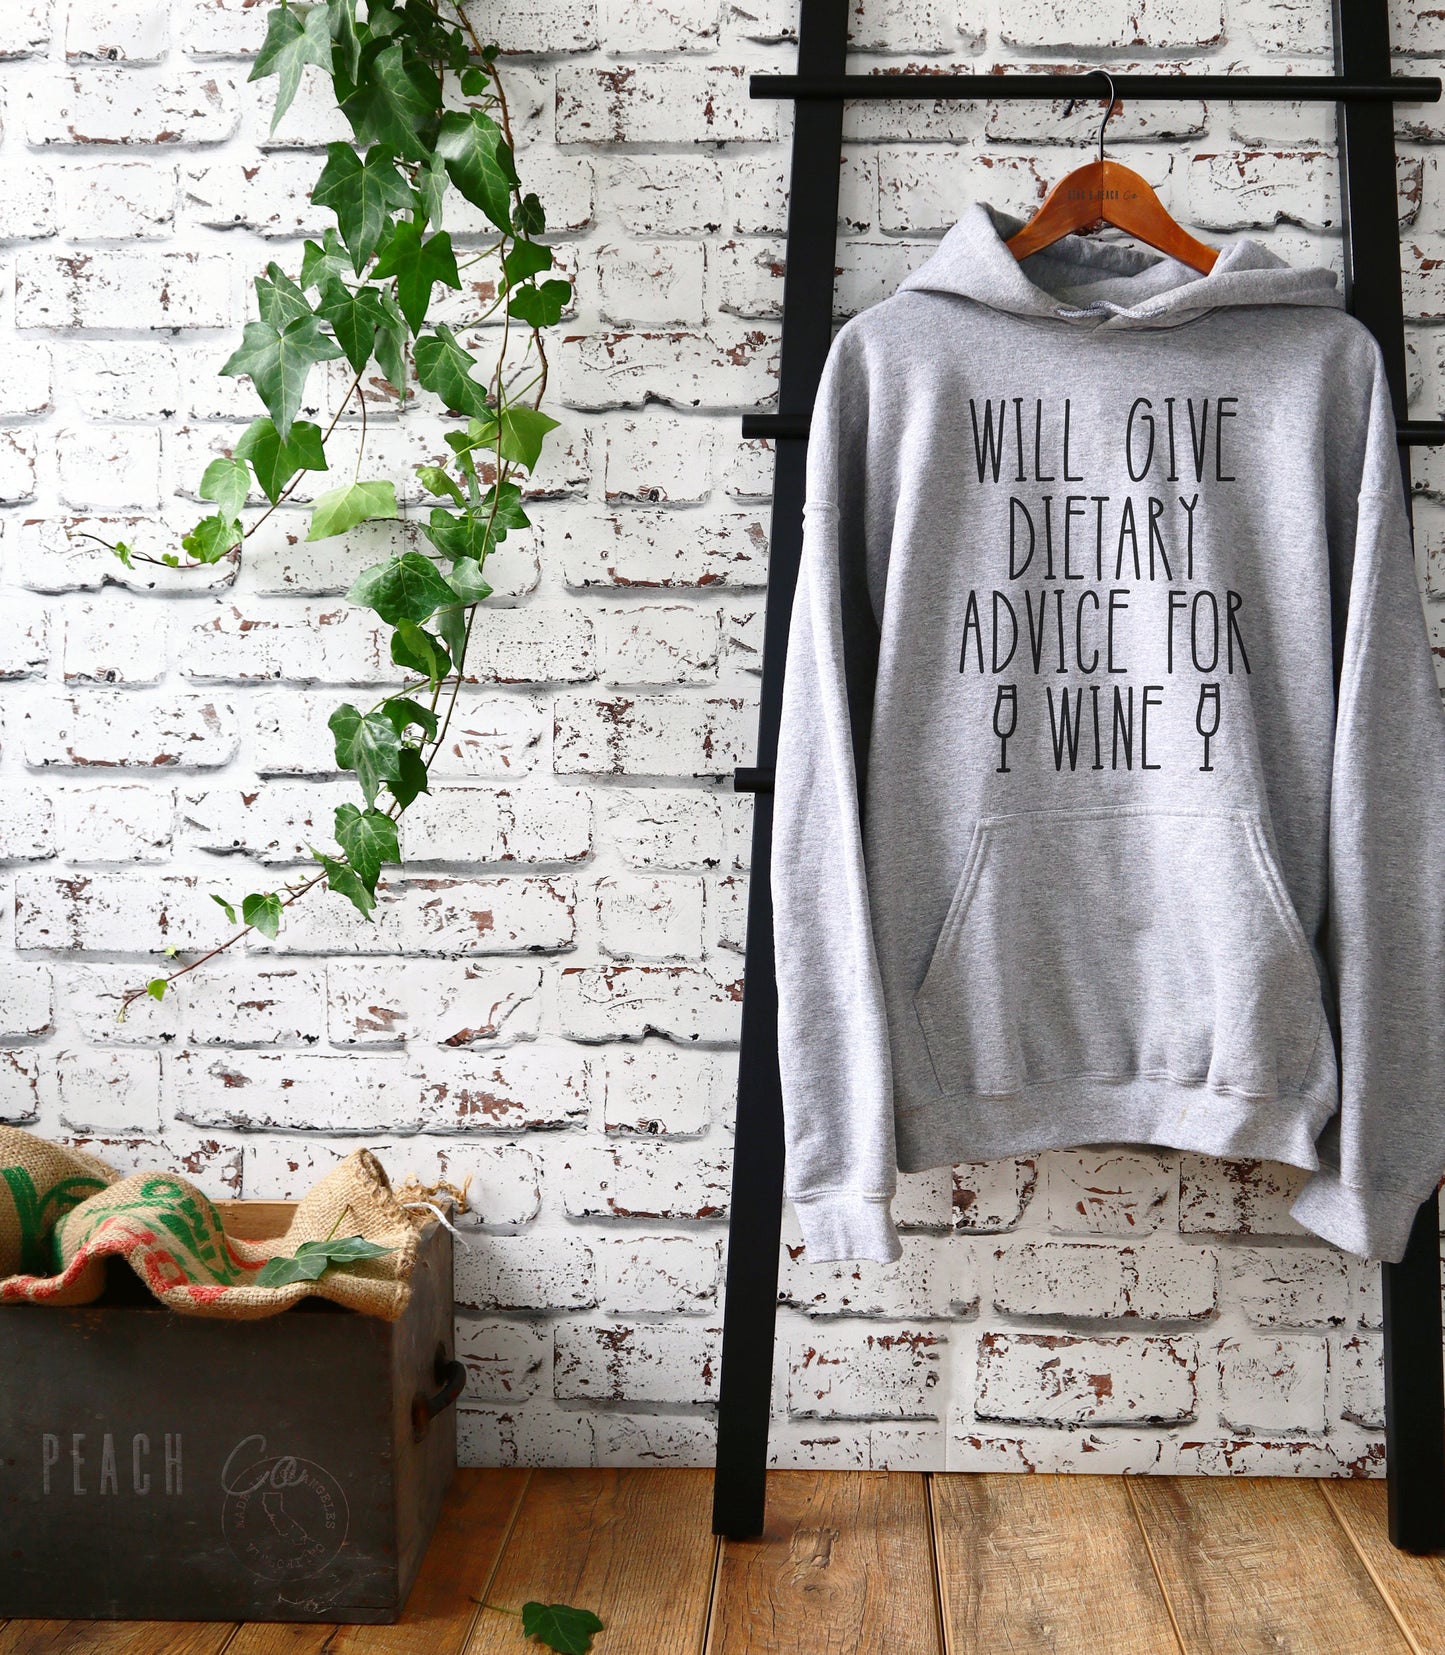 Will Give Dietary Advice For Wine Hoodie - Dietitian Shirt, Dietician Shirt, Nutritionist Shirt, RDN Shirt, Registered Dietitian Shirt